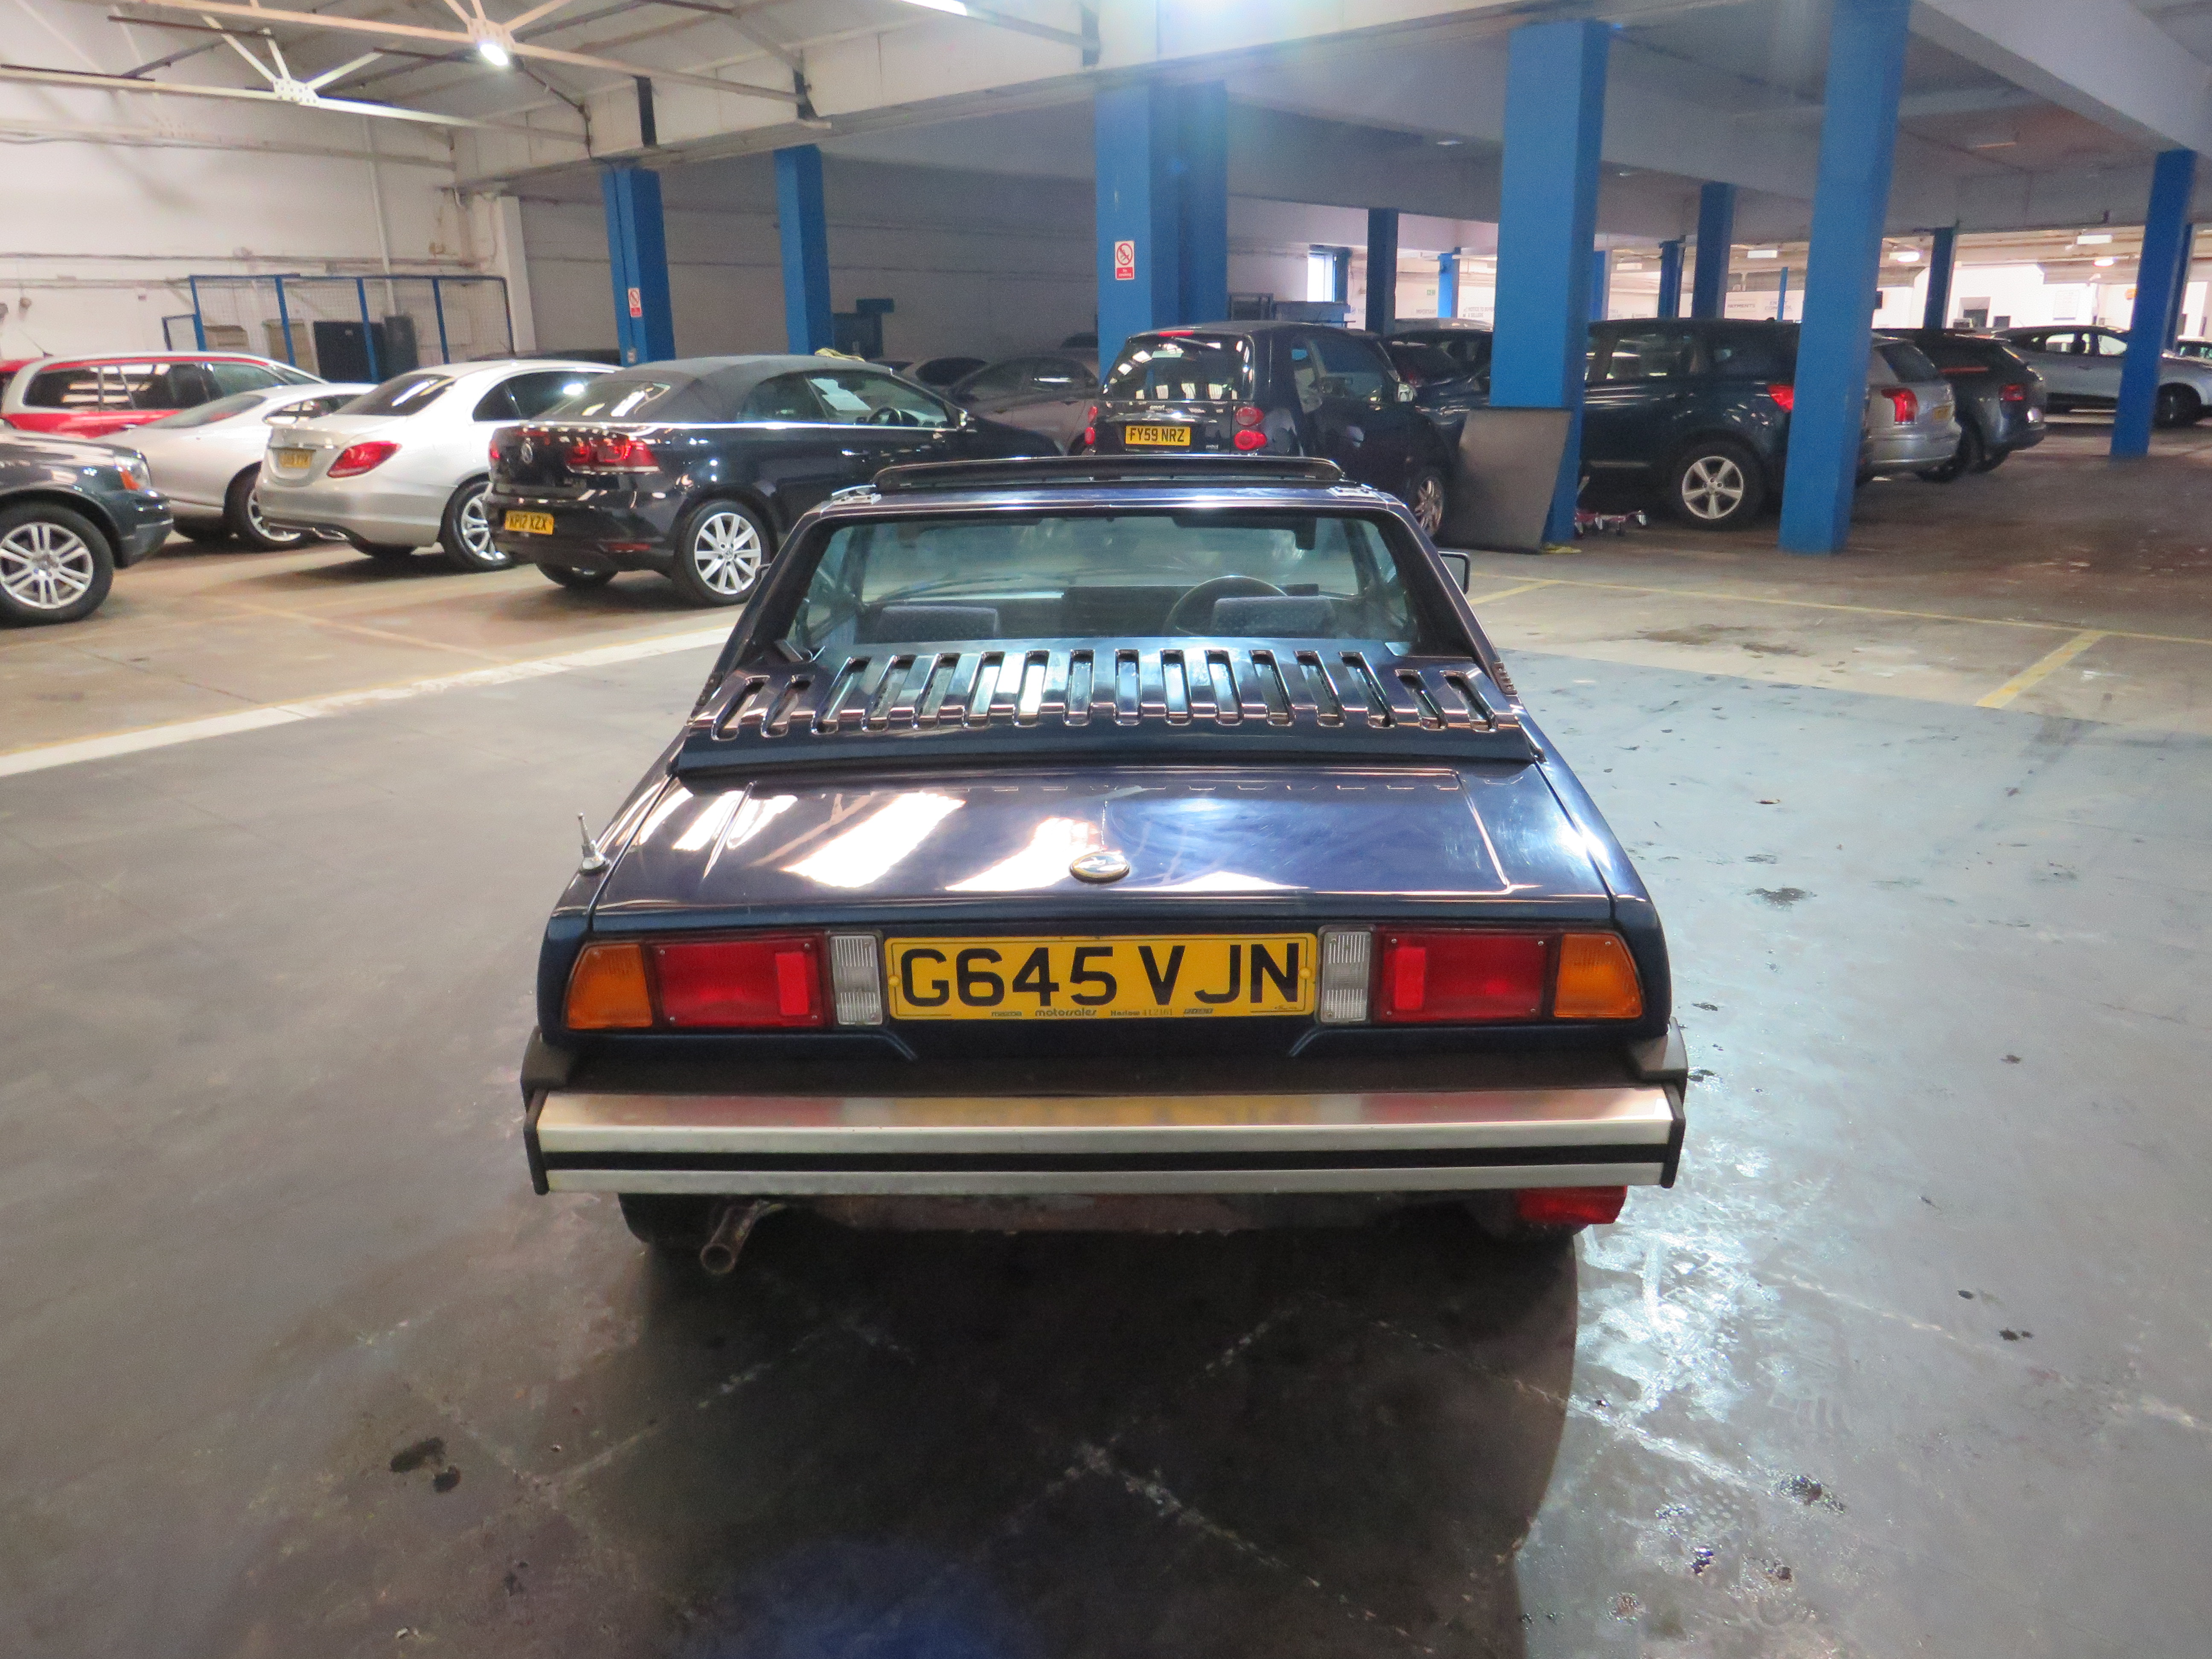 1989 Fiat X1/9 Gran Finale - 1498cc - ONE OWNER FROM NEW - Image 10 of 38